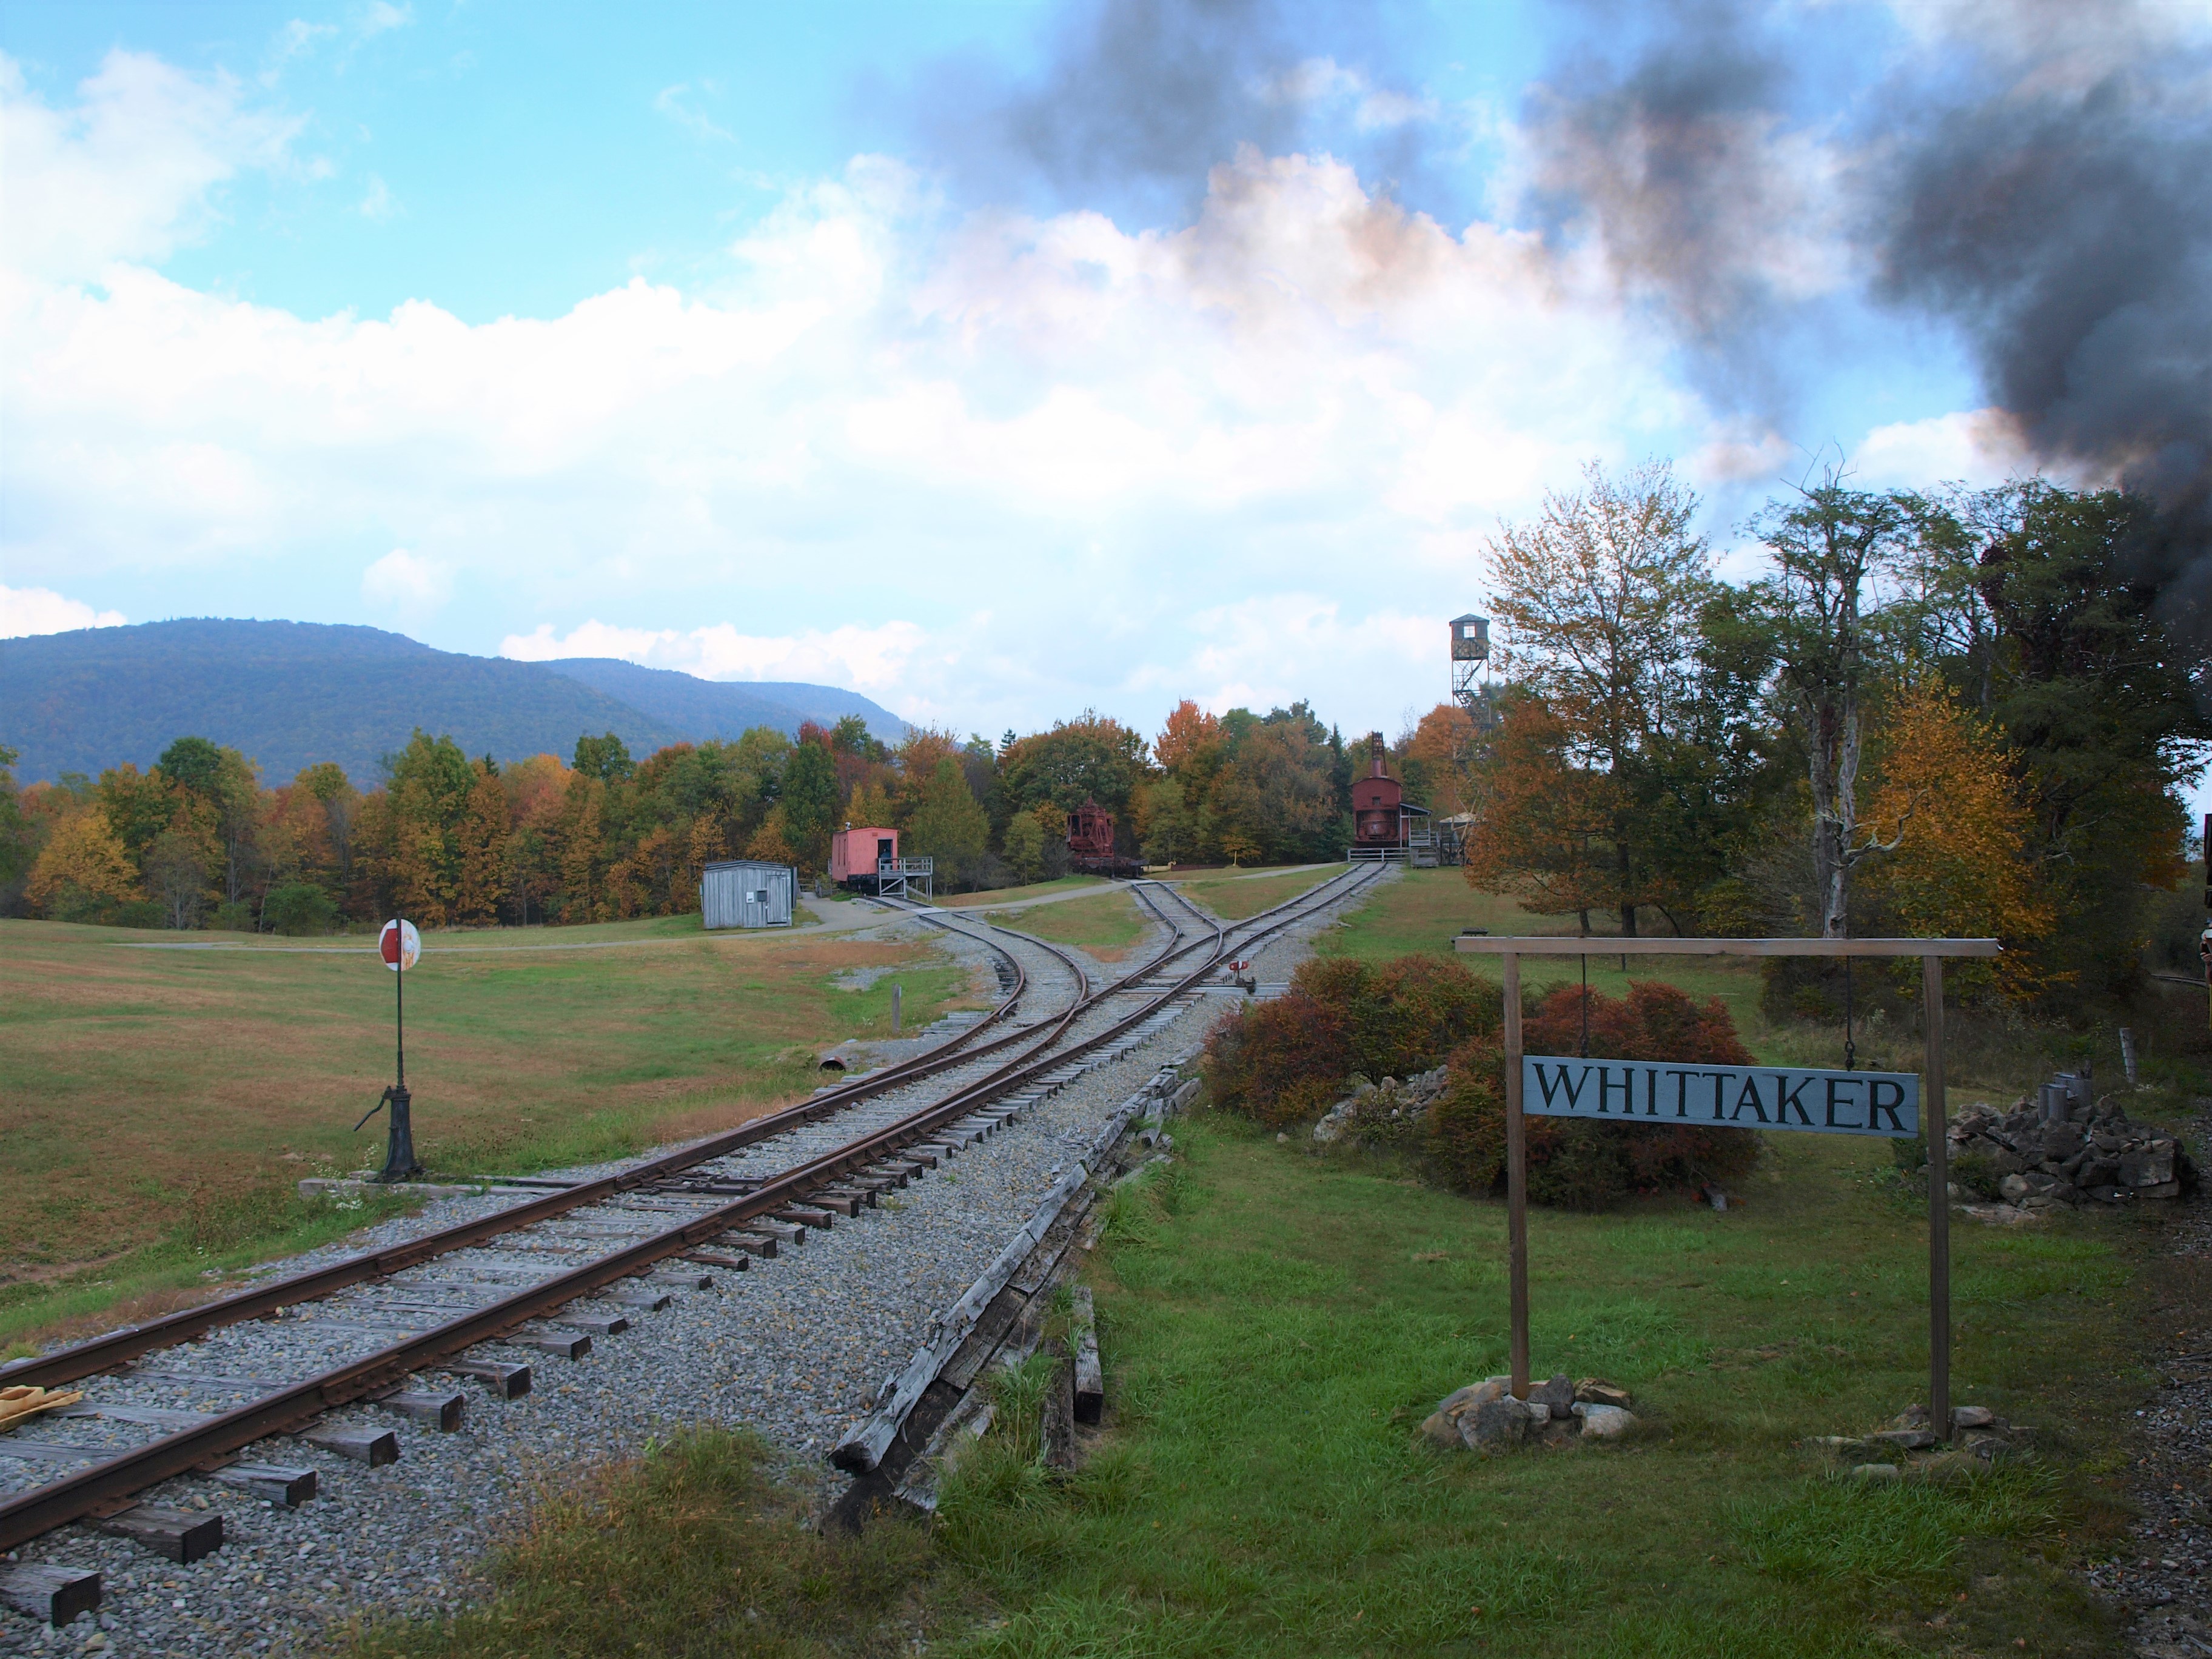 Experience West Virginia’s Railroad and Logging Heritage at Cass Scenic Railroad